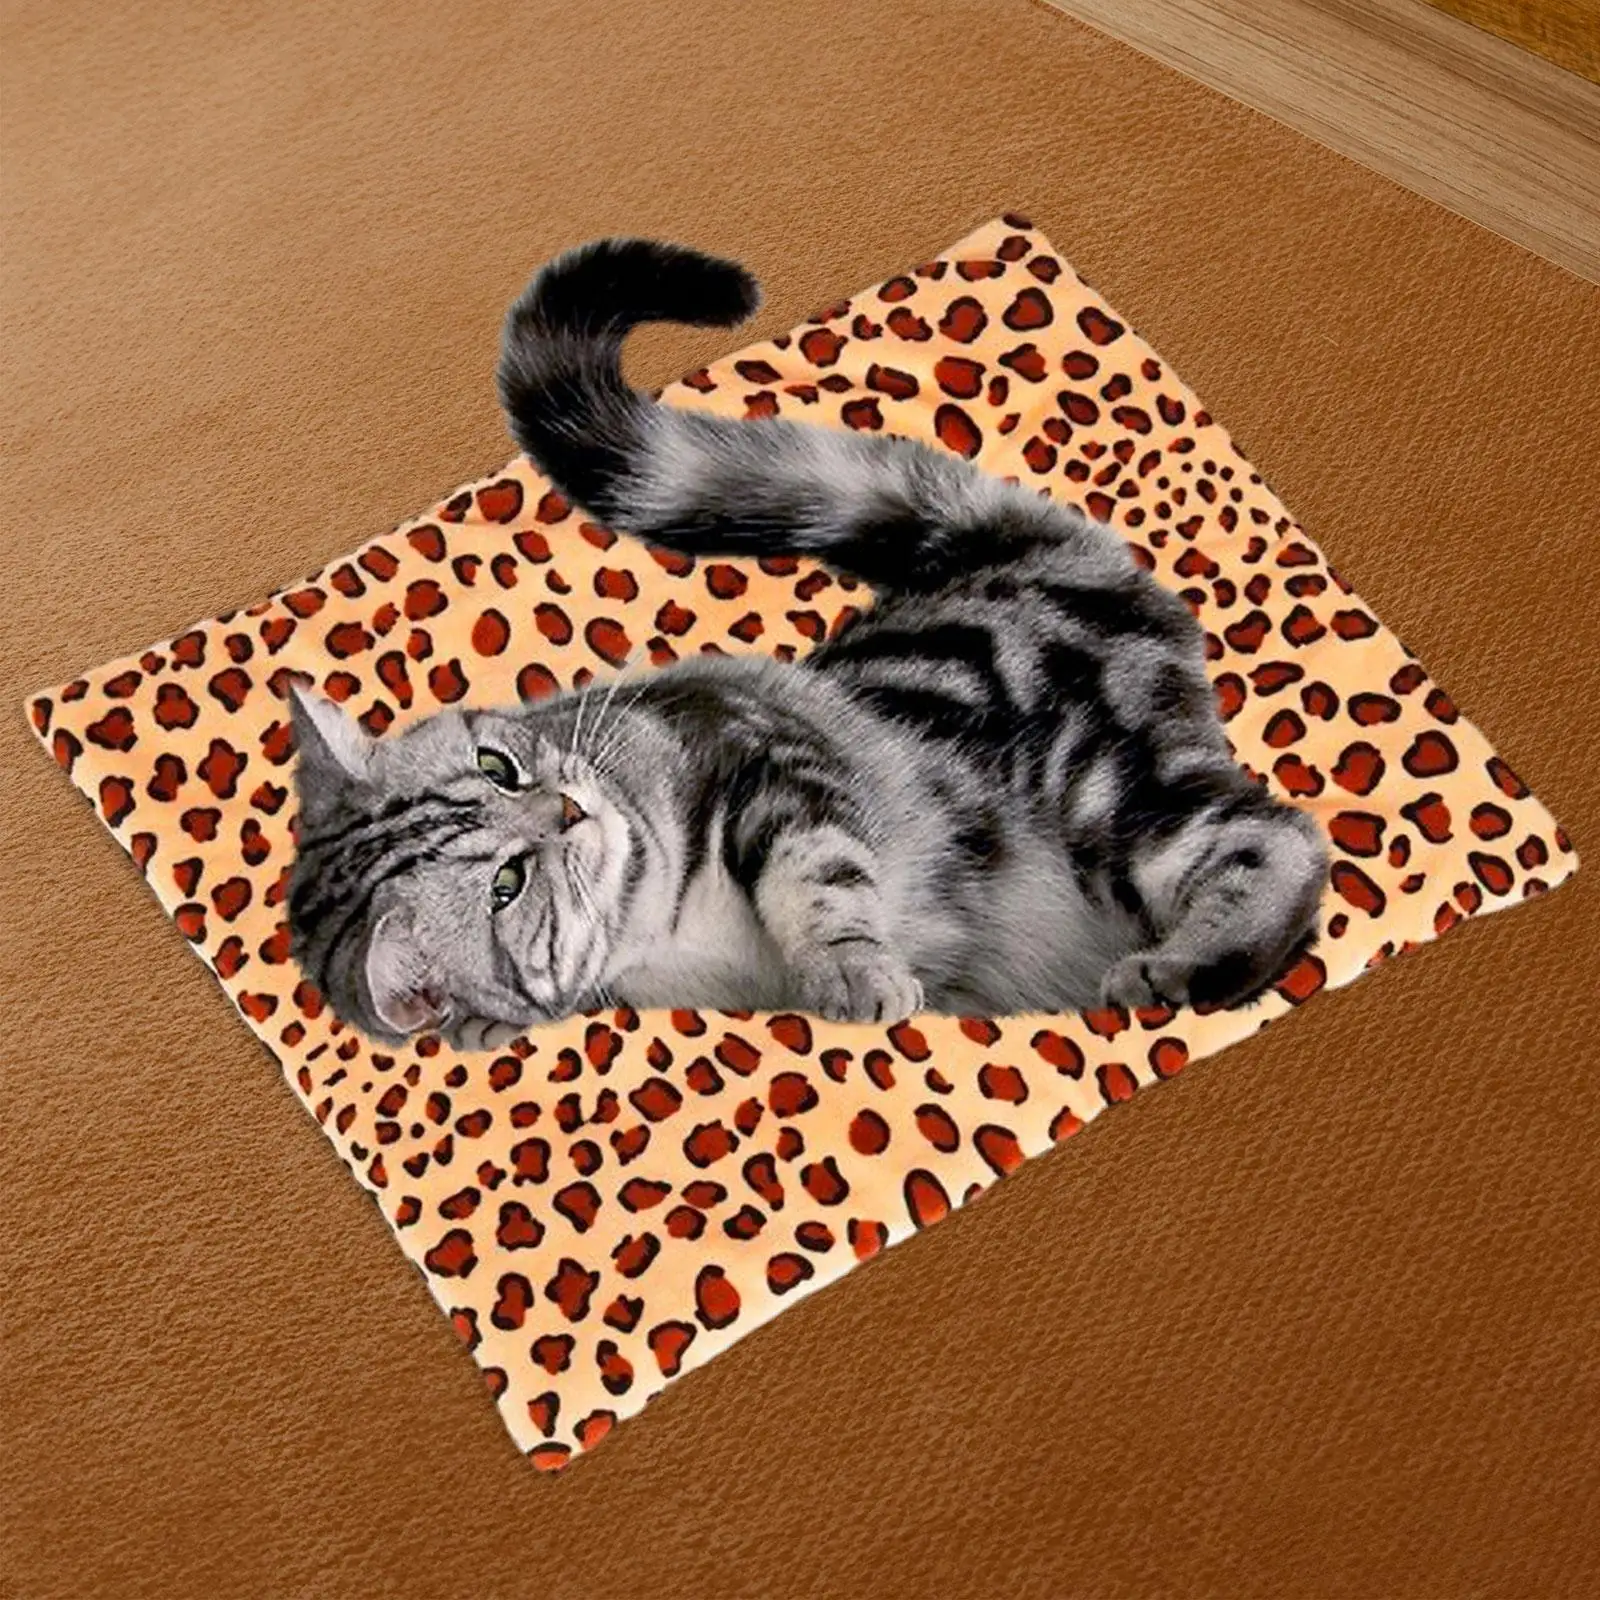 Pet Heating Pads Adjustable Temperature Thermal Pad Winter Warm Pet Heated Mat Cats Dogs Warmer Bed for Resting Sleeping Kitty